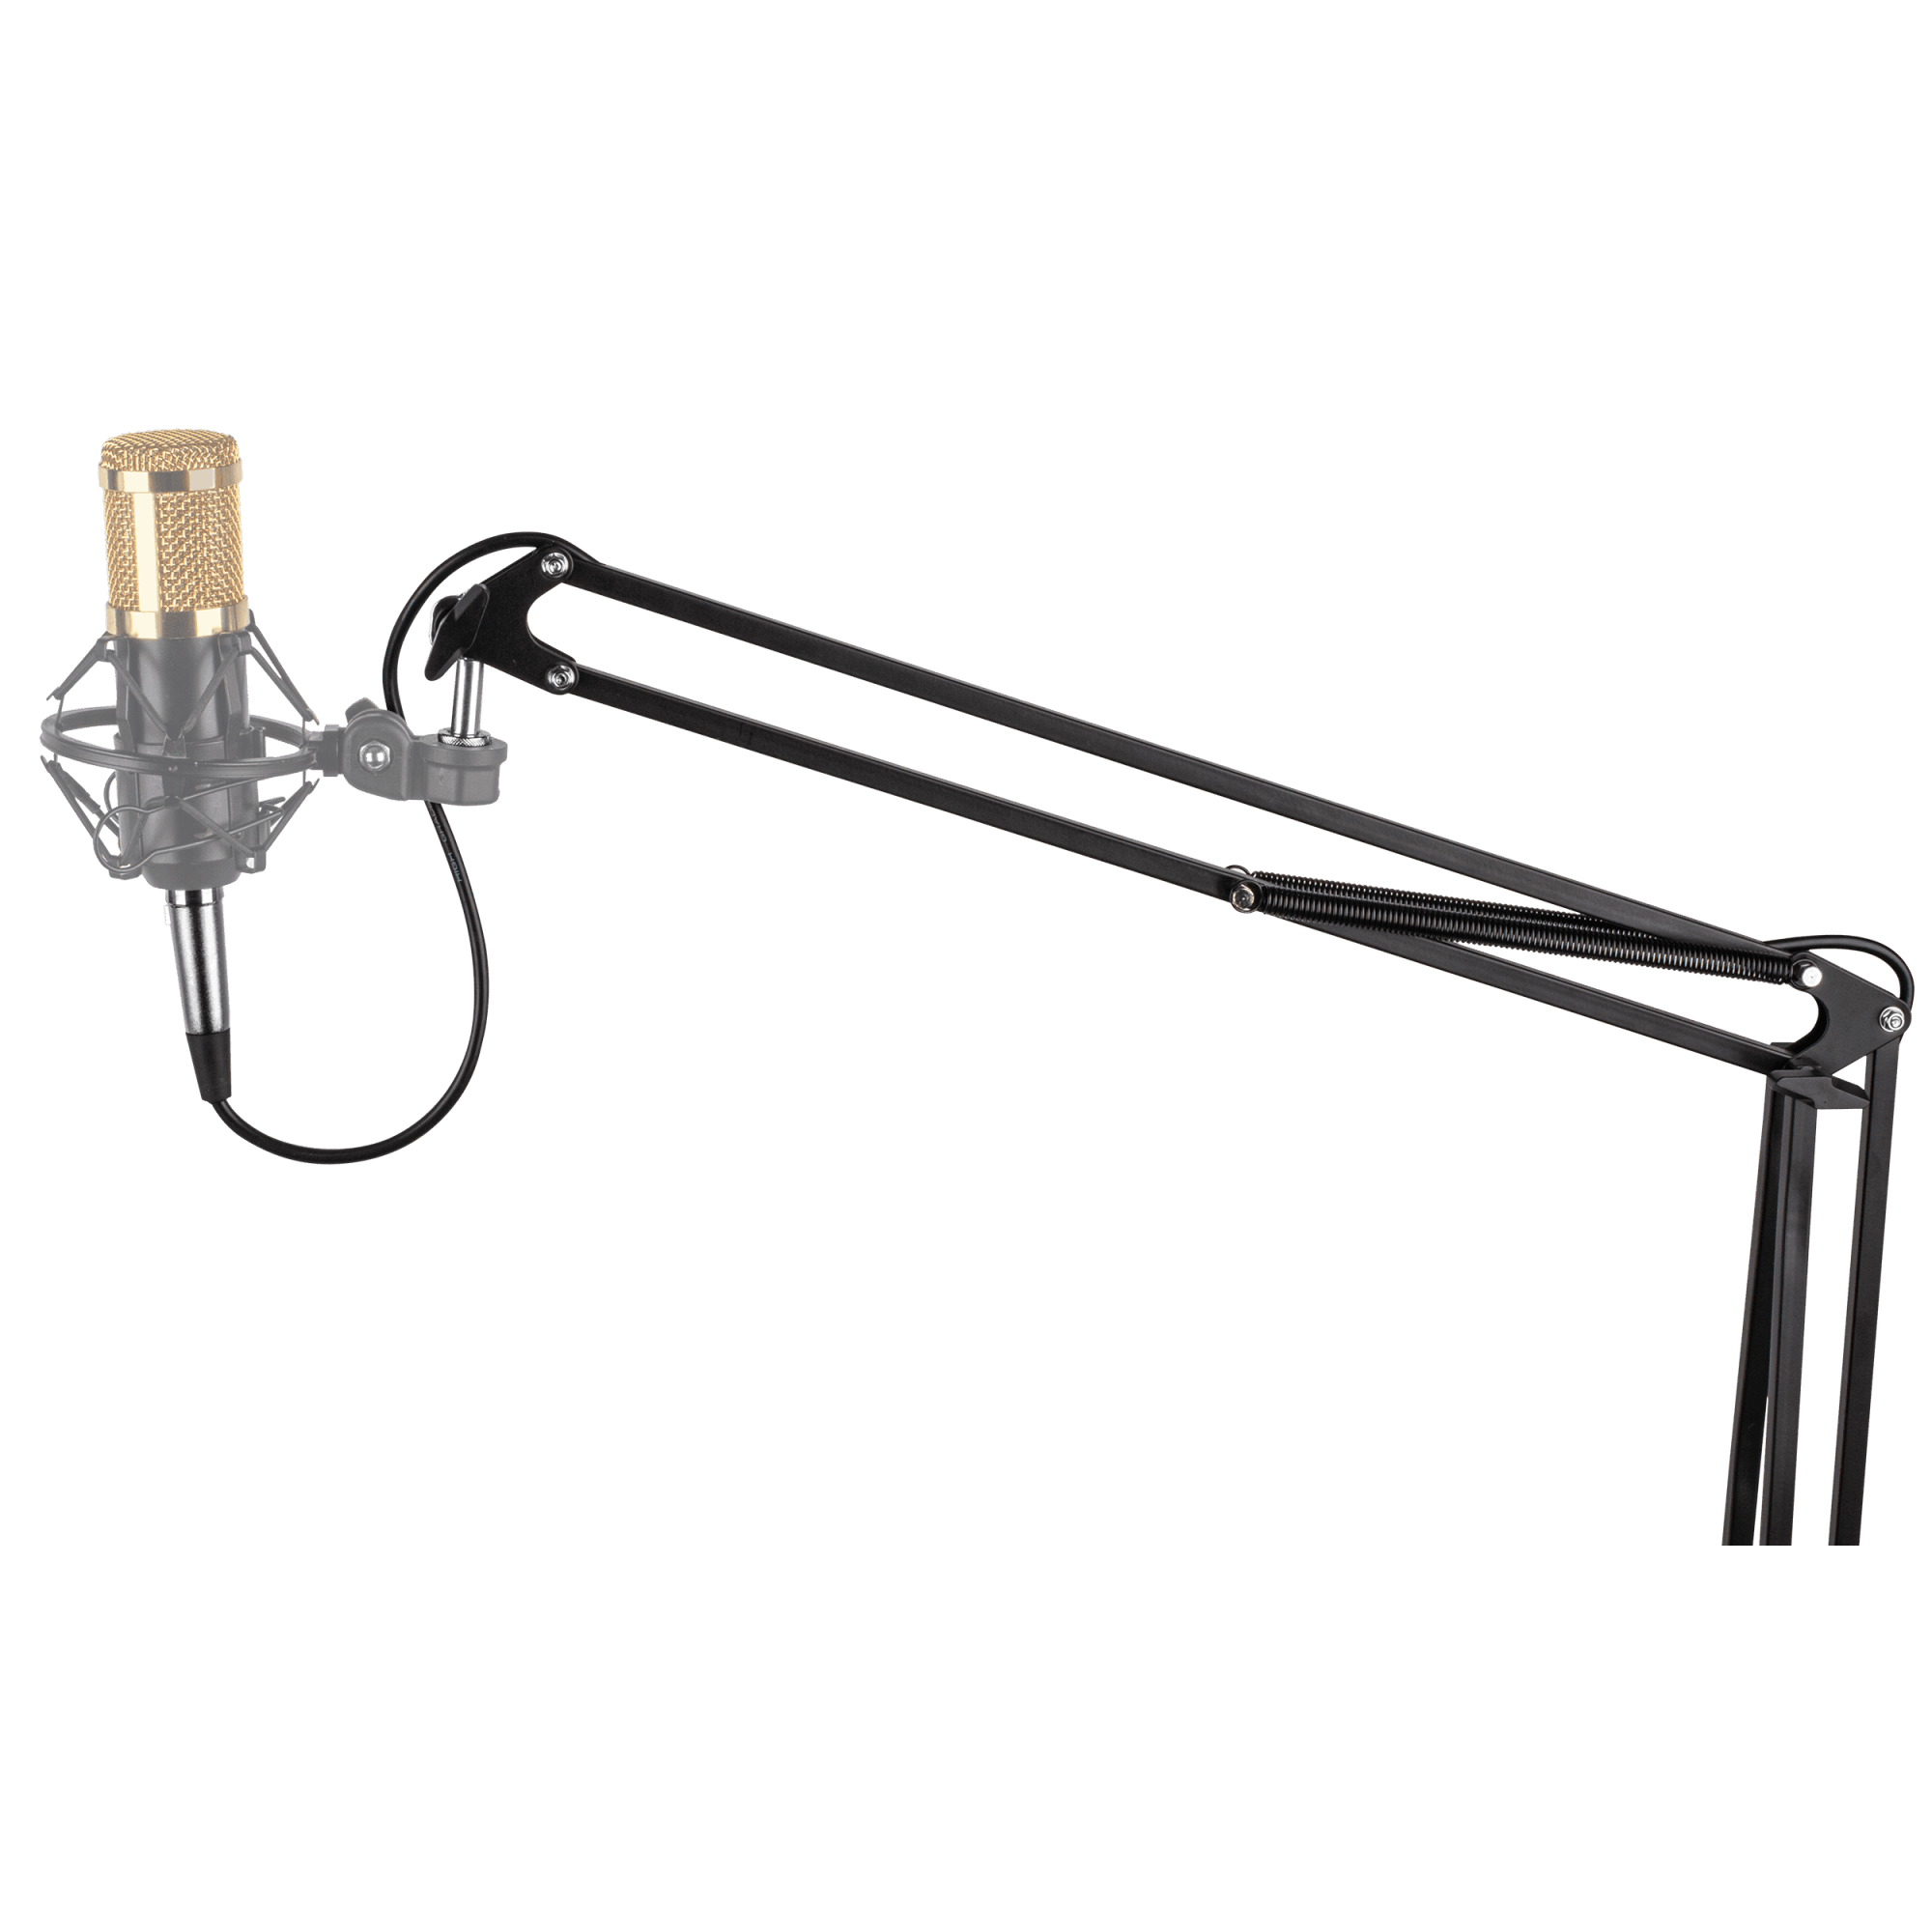 Xtreme Desk Mount Microphone Boom Arm w/ XLR Cable - Live & Recording - Microphones - Accessories by Xtreme at Muso's Stuff